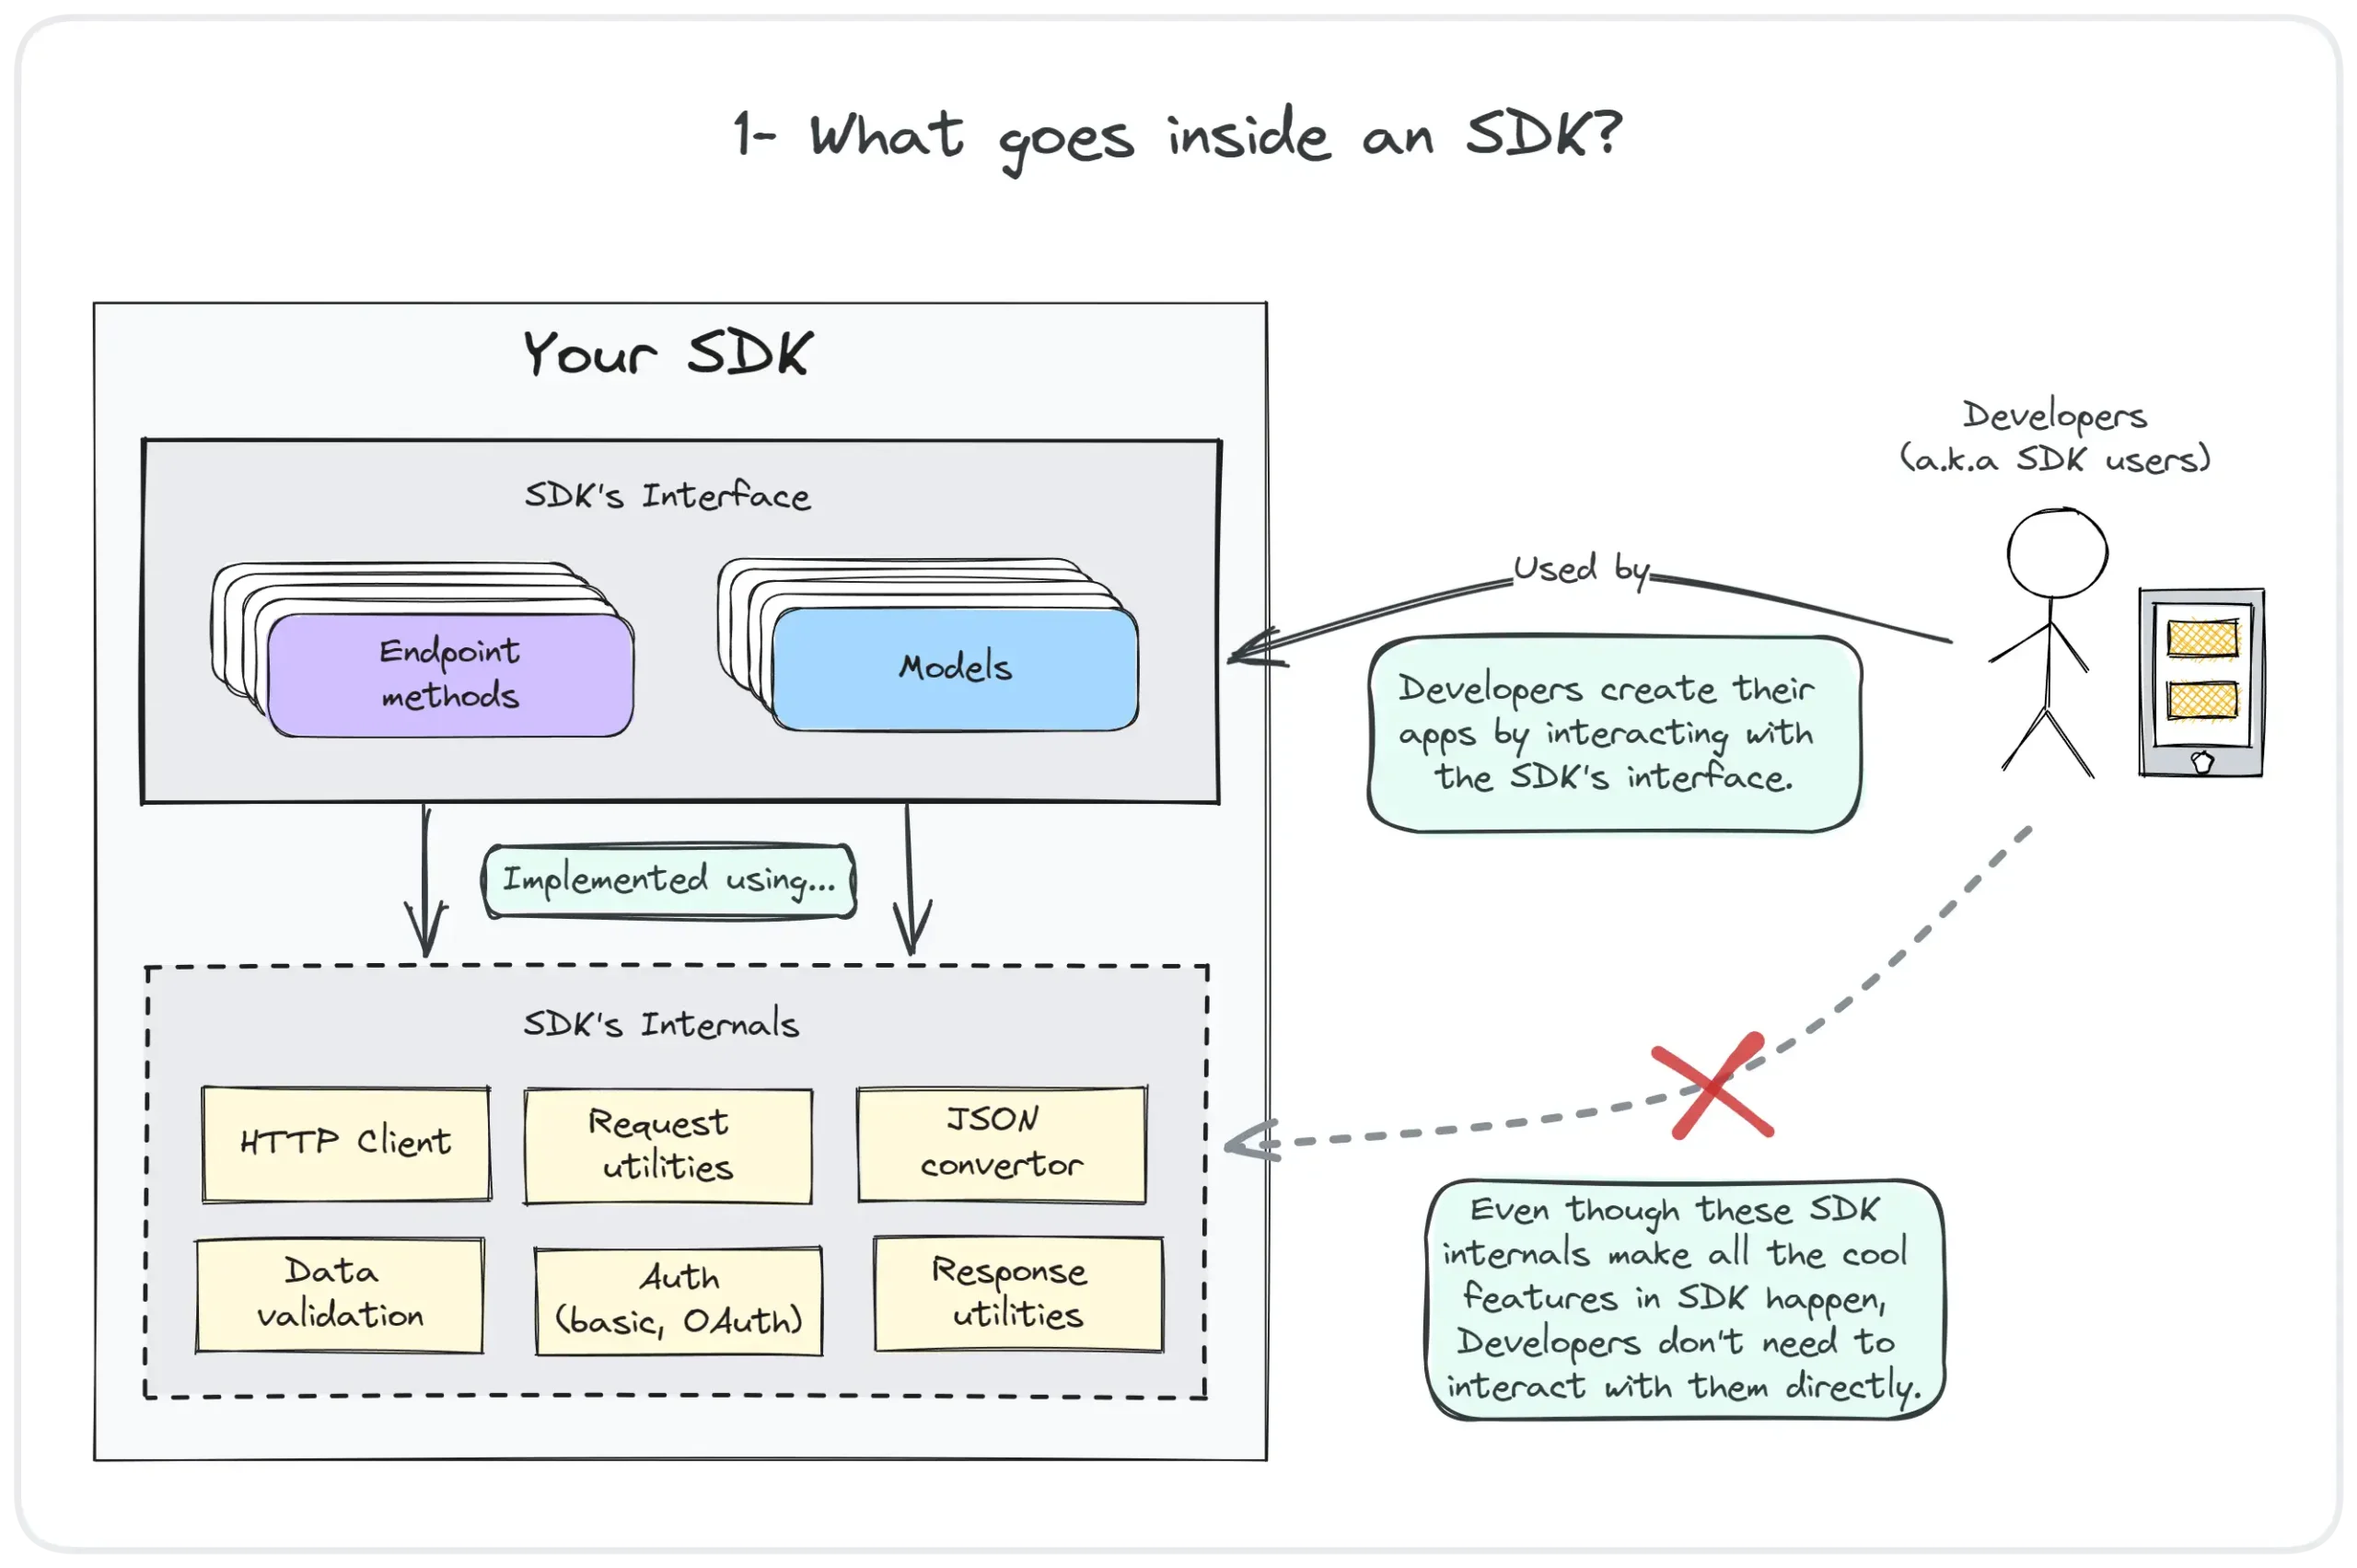 What goes inside an SDK?